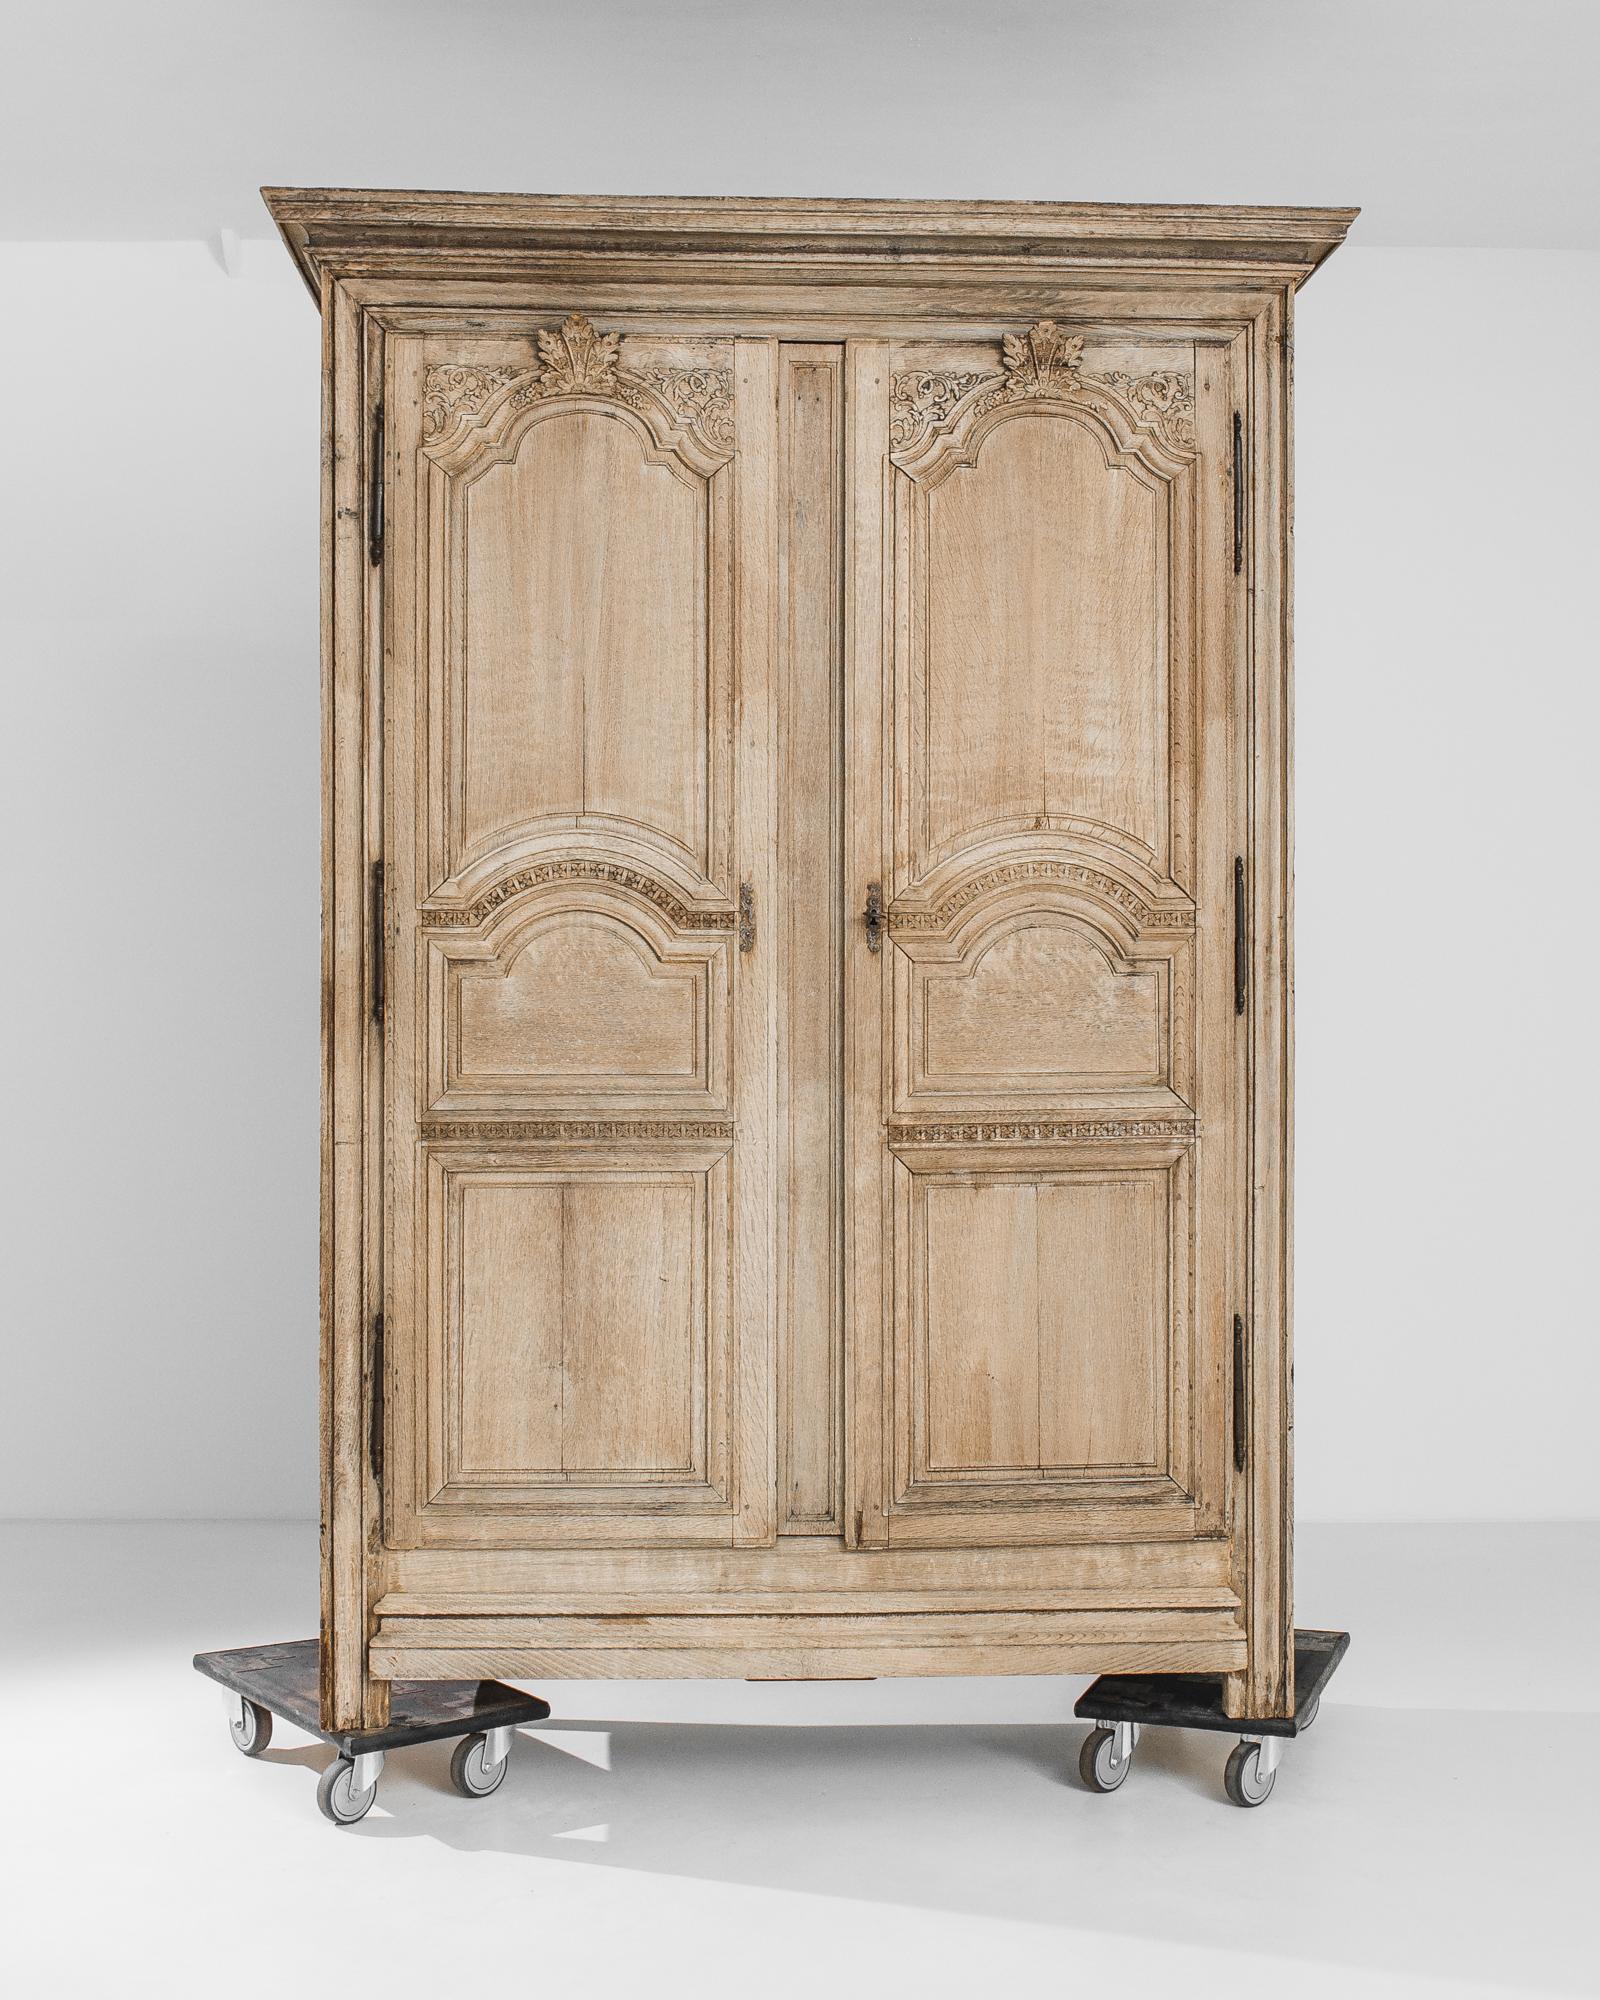 Intricate carved detail lends this oak armoire from 1860s France a verdant air. The graceful arches of the paneled doors are crowned by carved fleur de lis, winding acanthus leaves and delicate forget-me-not flowers. A pattern of carved four-petaled